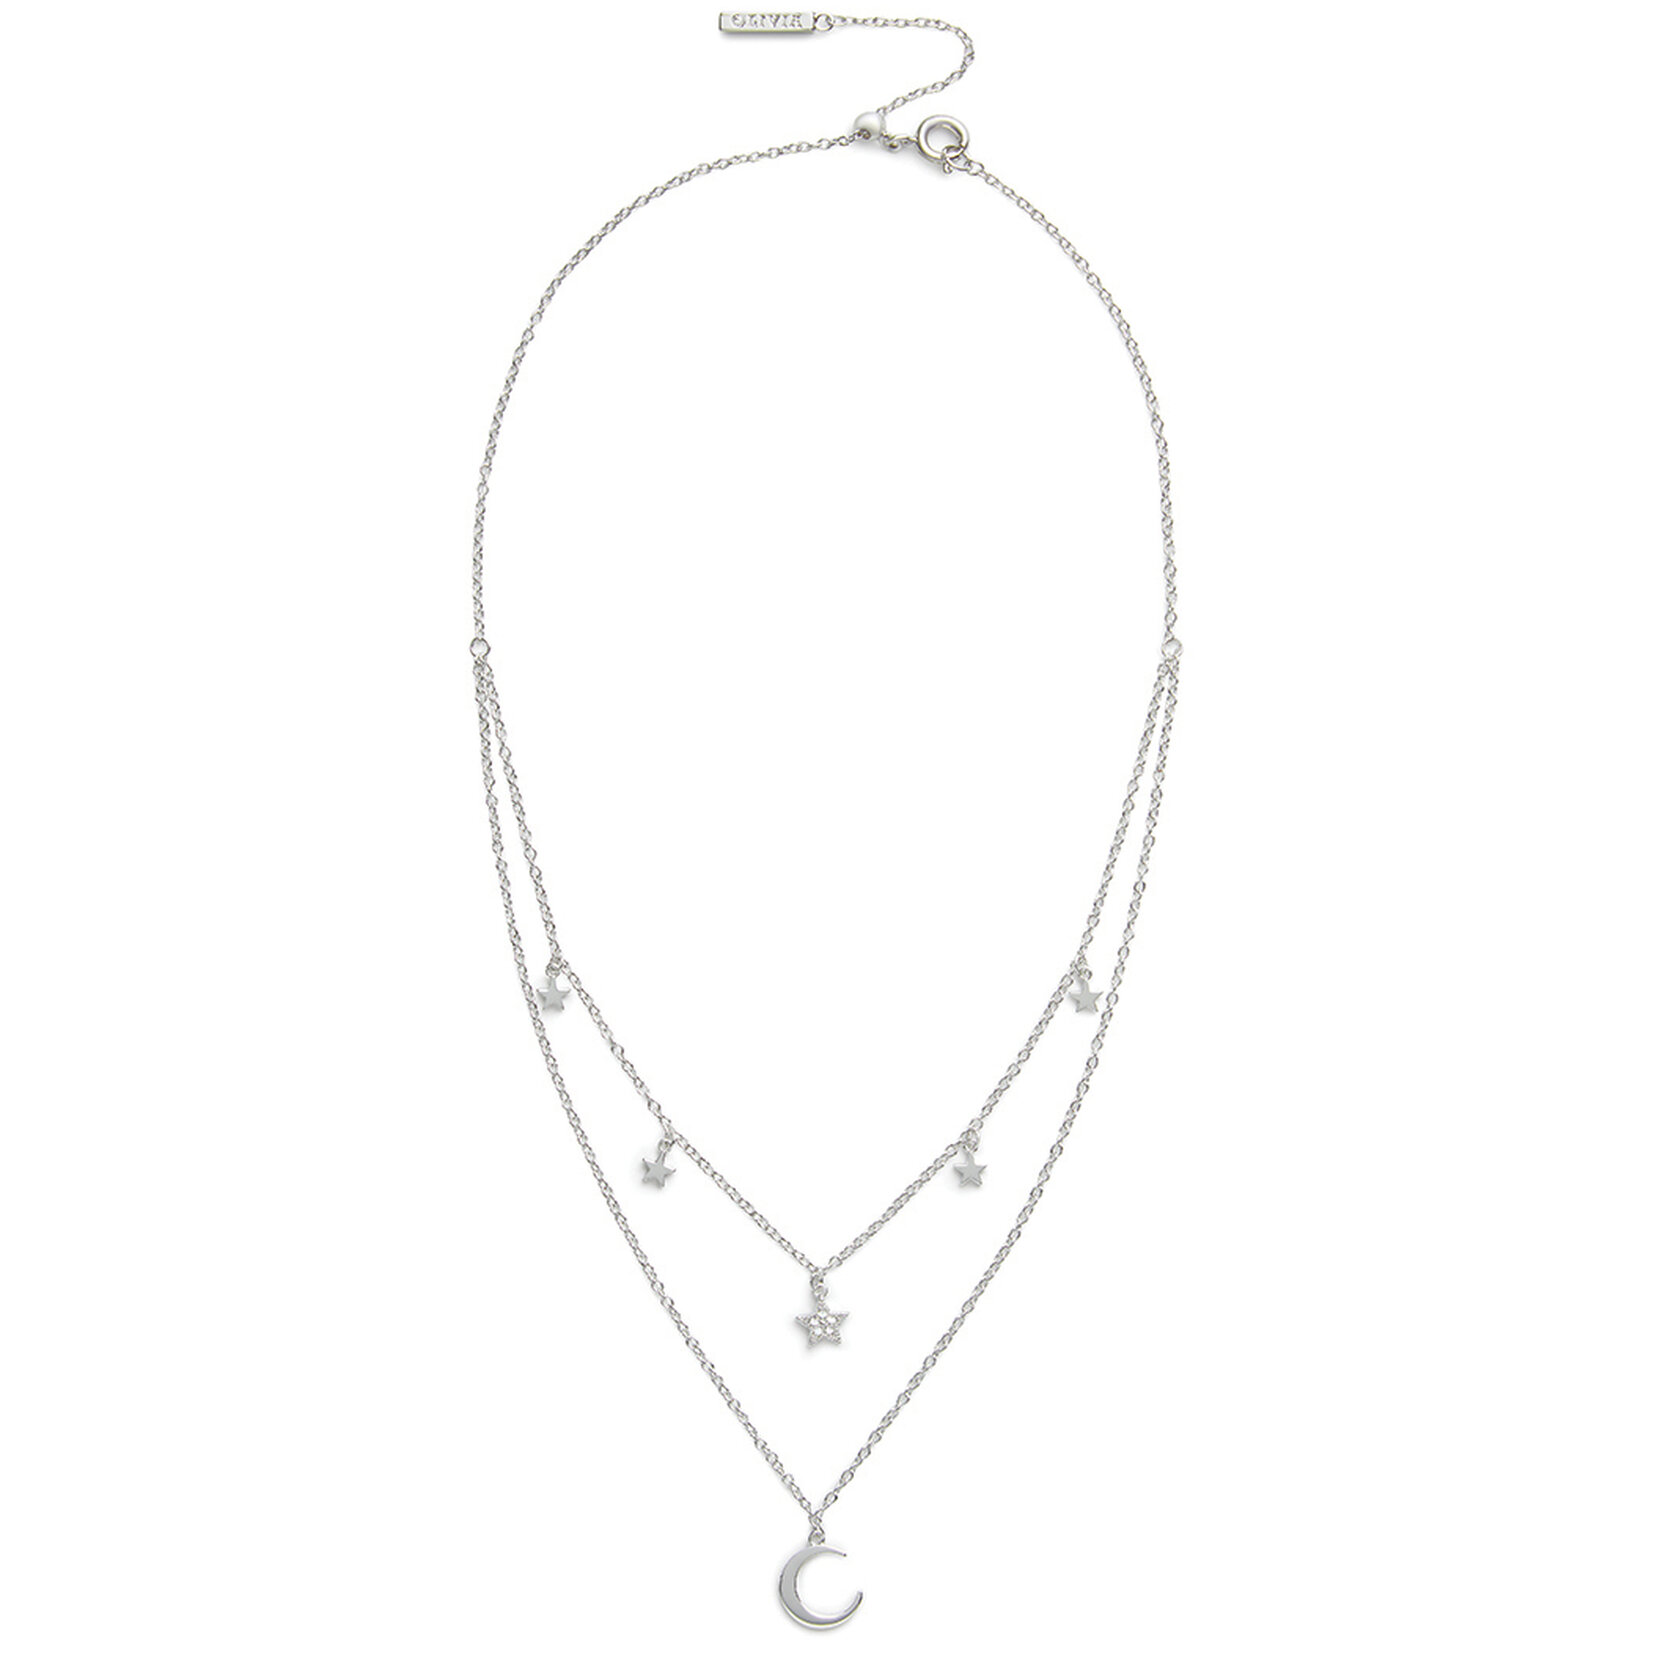 Silver Moon & Star Double Chain Necklace